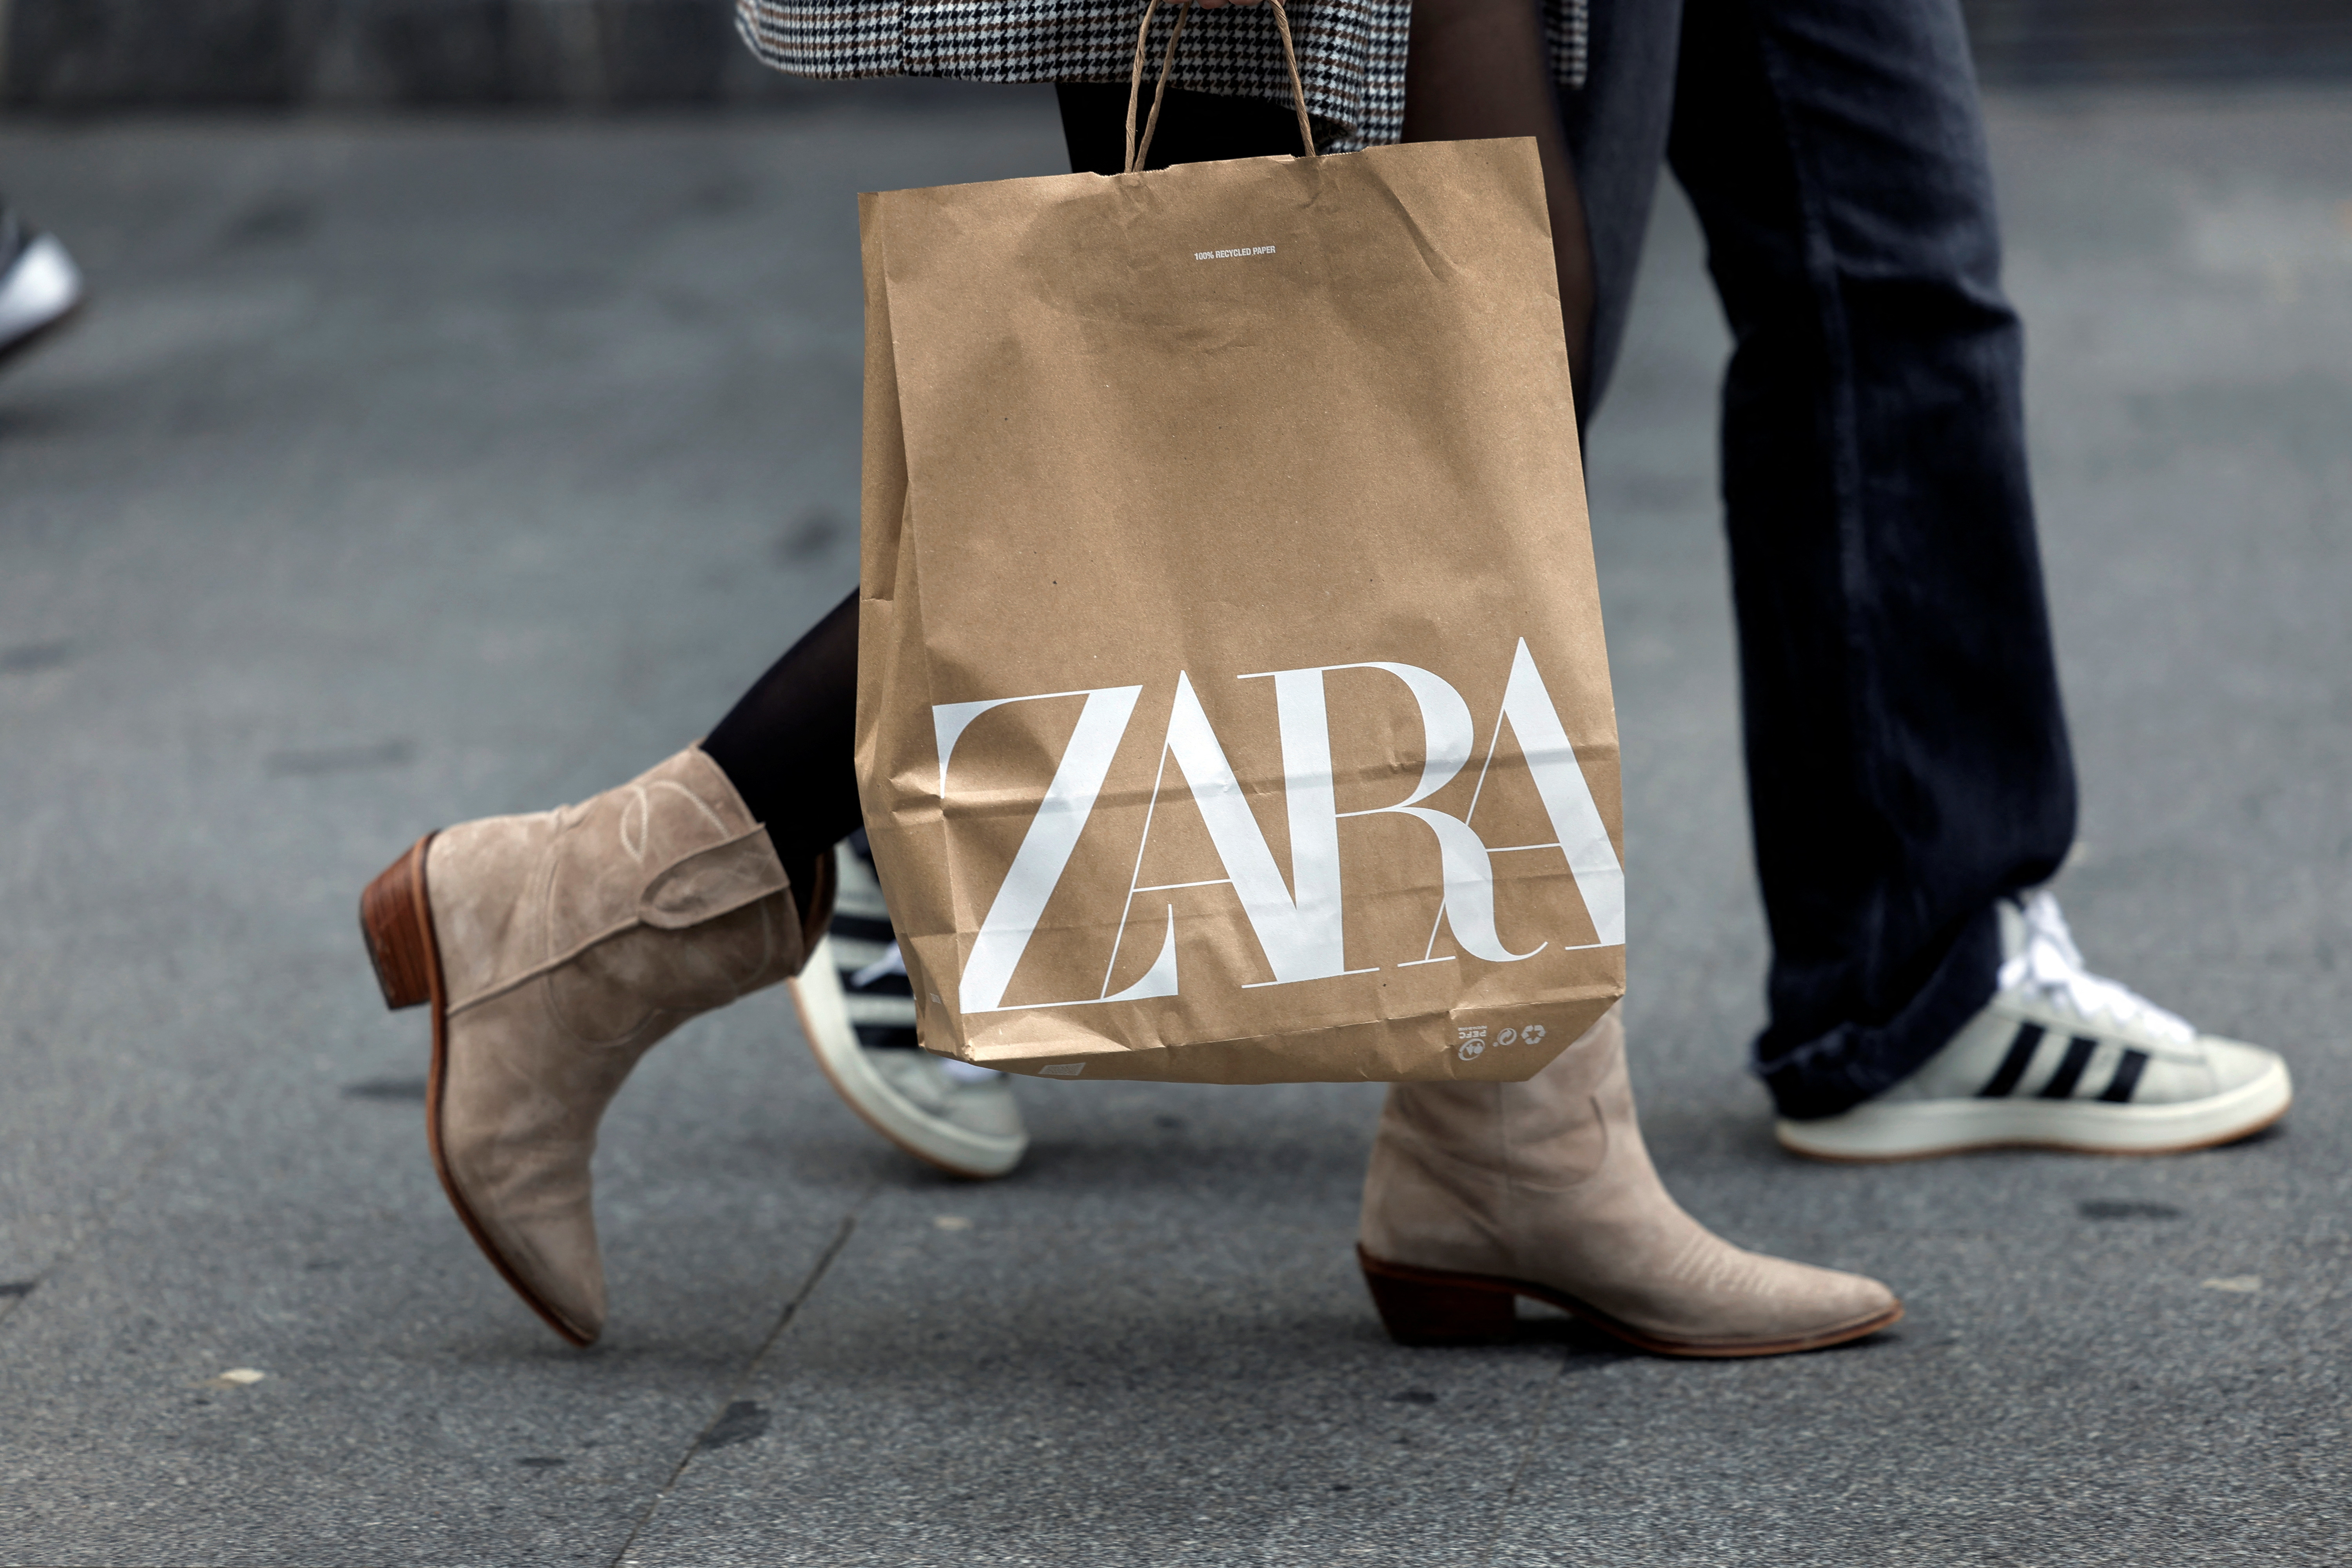 A woman carries a bag from Spanish multinational retail clothing chain Zara, in Bilbao